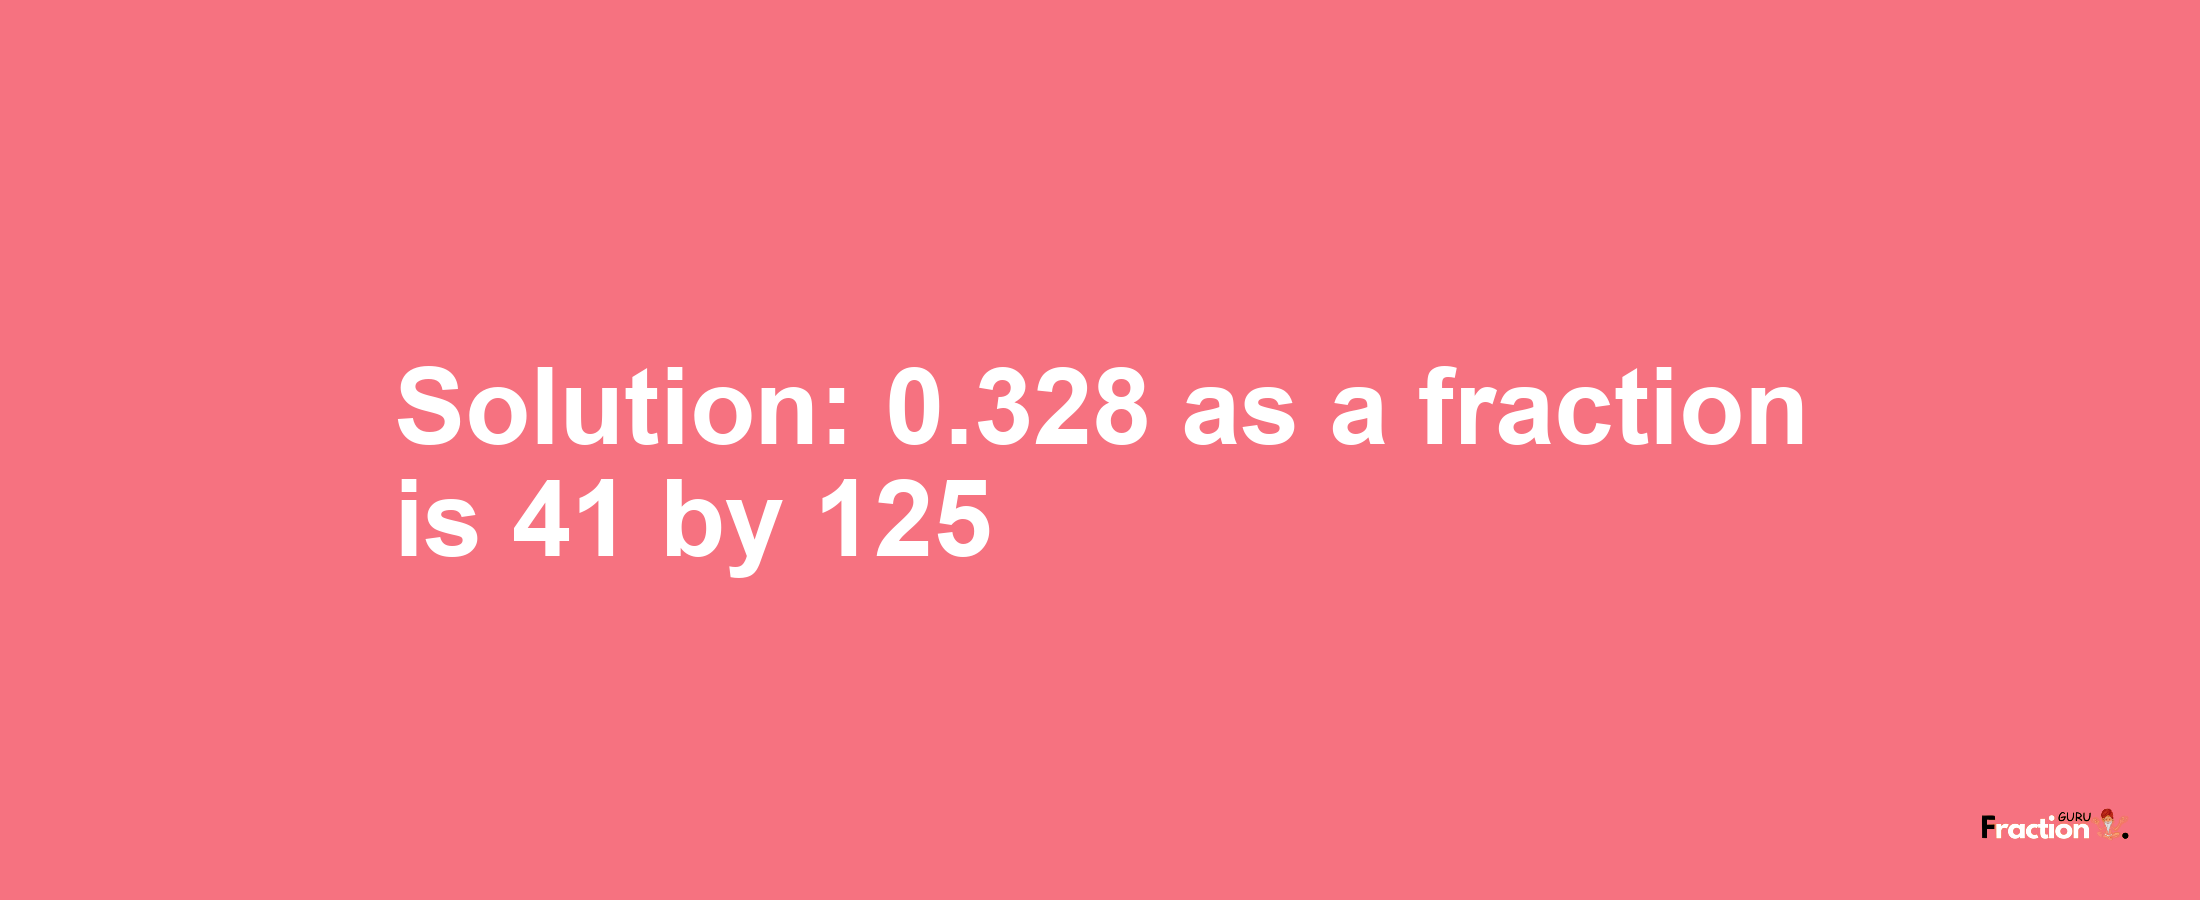 Solution:0.328 as a fraction is 41/125